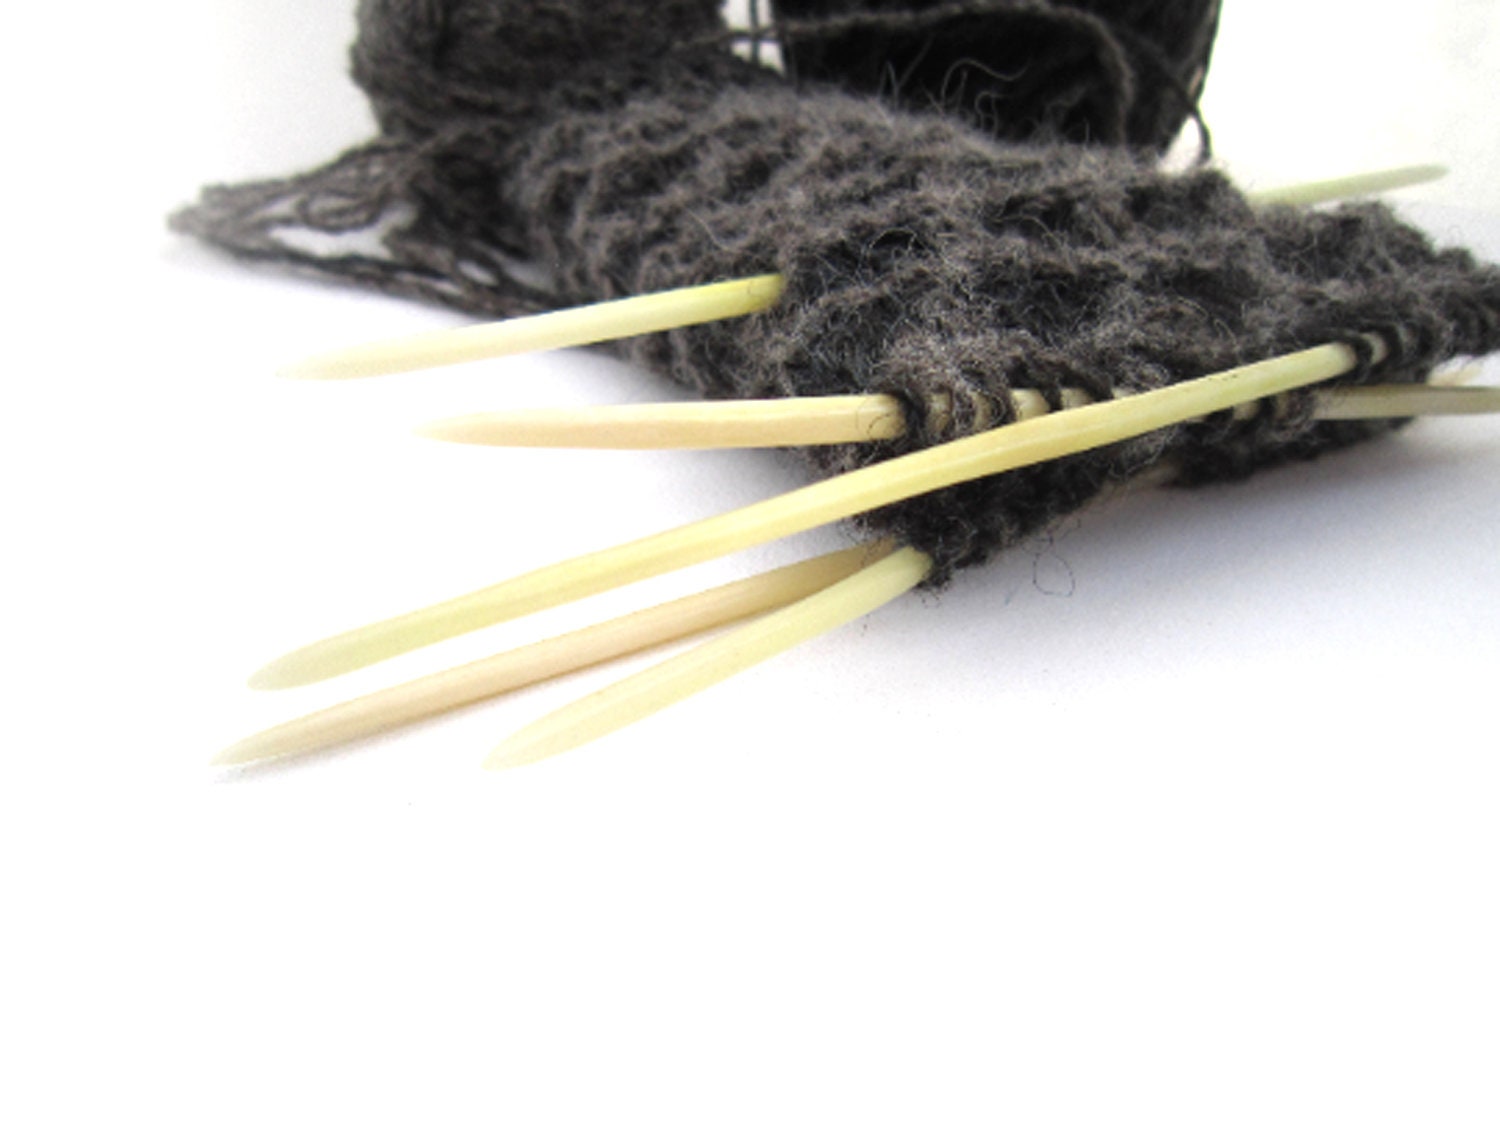 Why Use Natural Needles For Knitting?